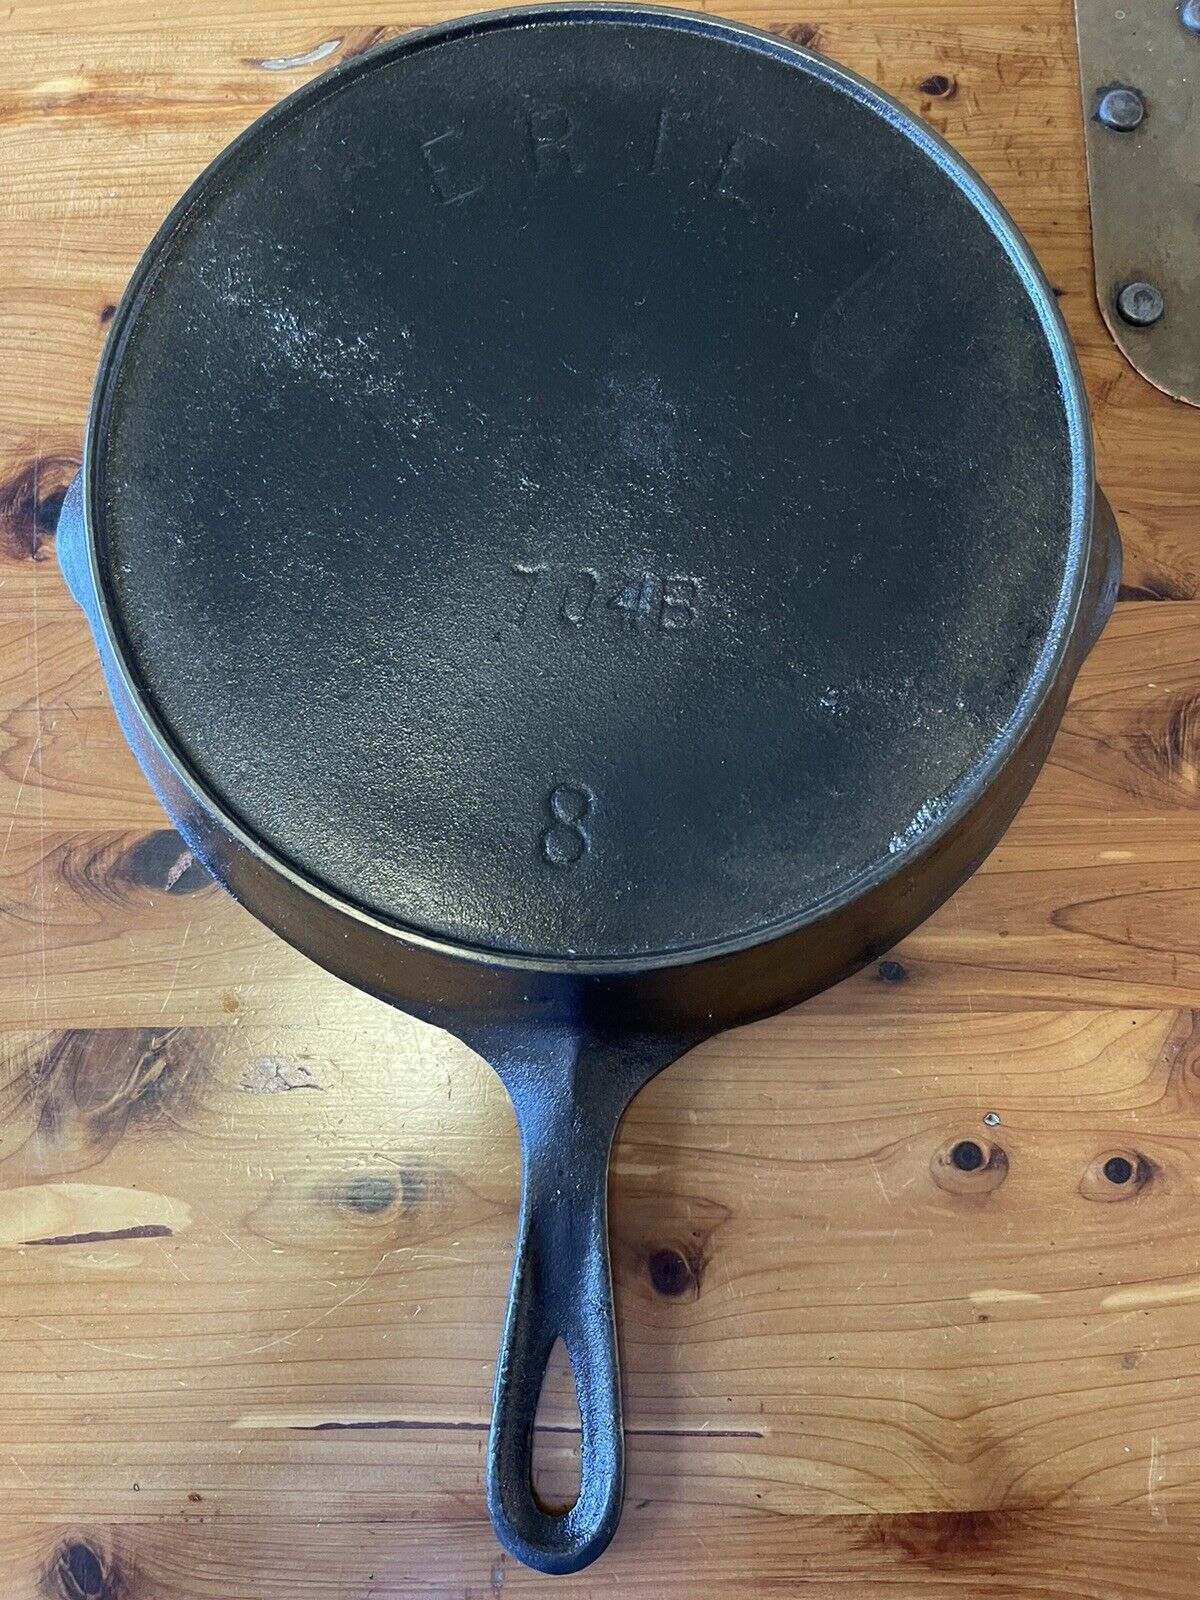 Pre Griswold “Erie” #8 Cast Iron Skillet 704B Restored Seasoned Nice w/ Curly R